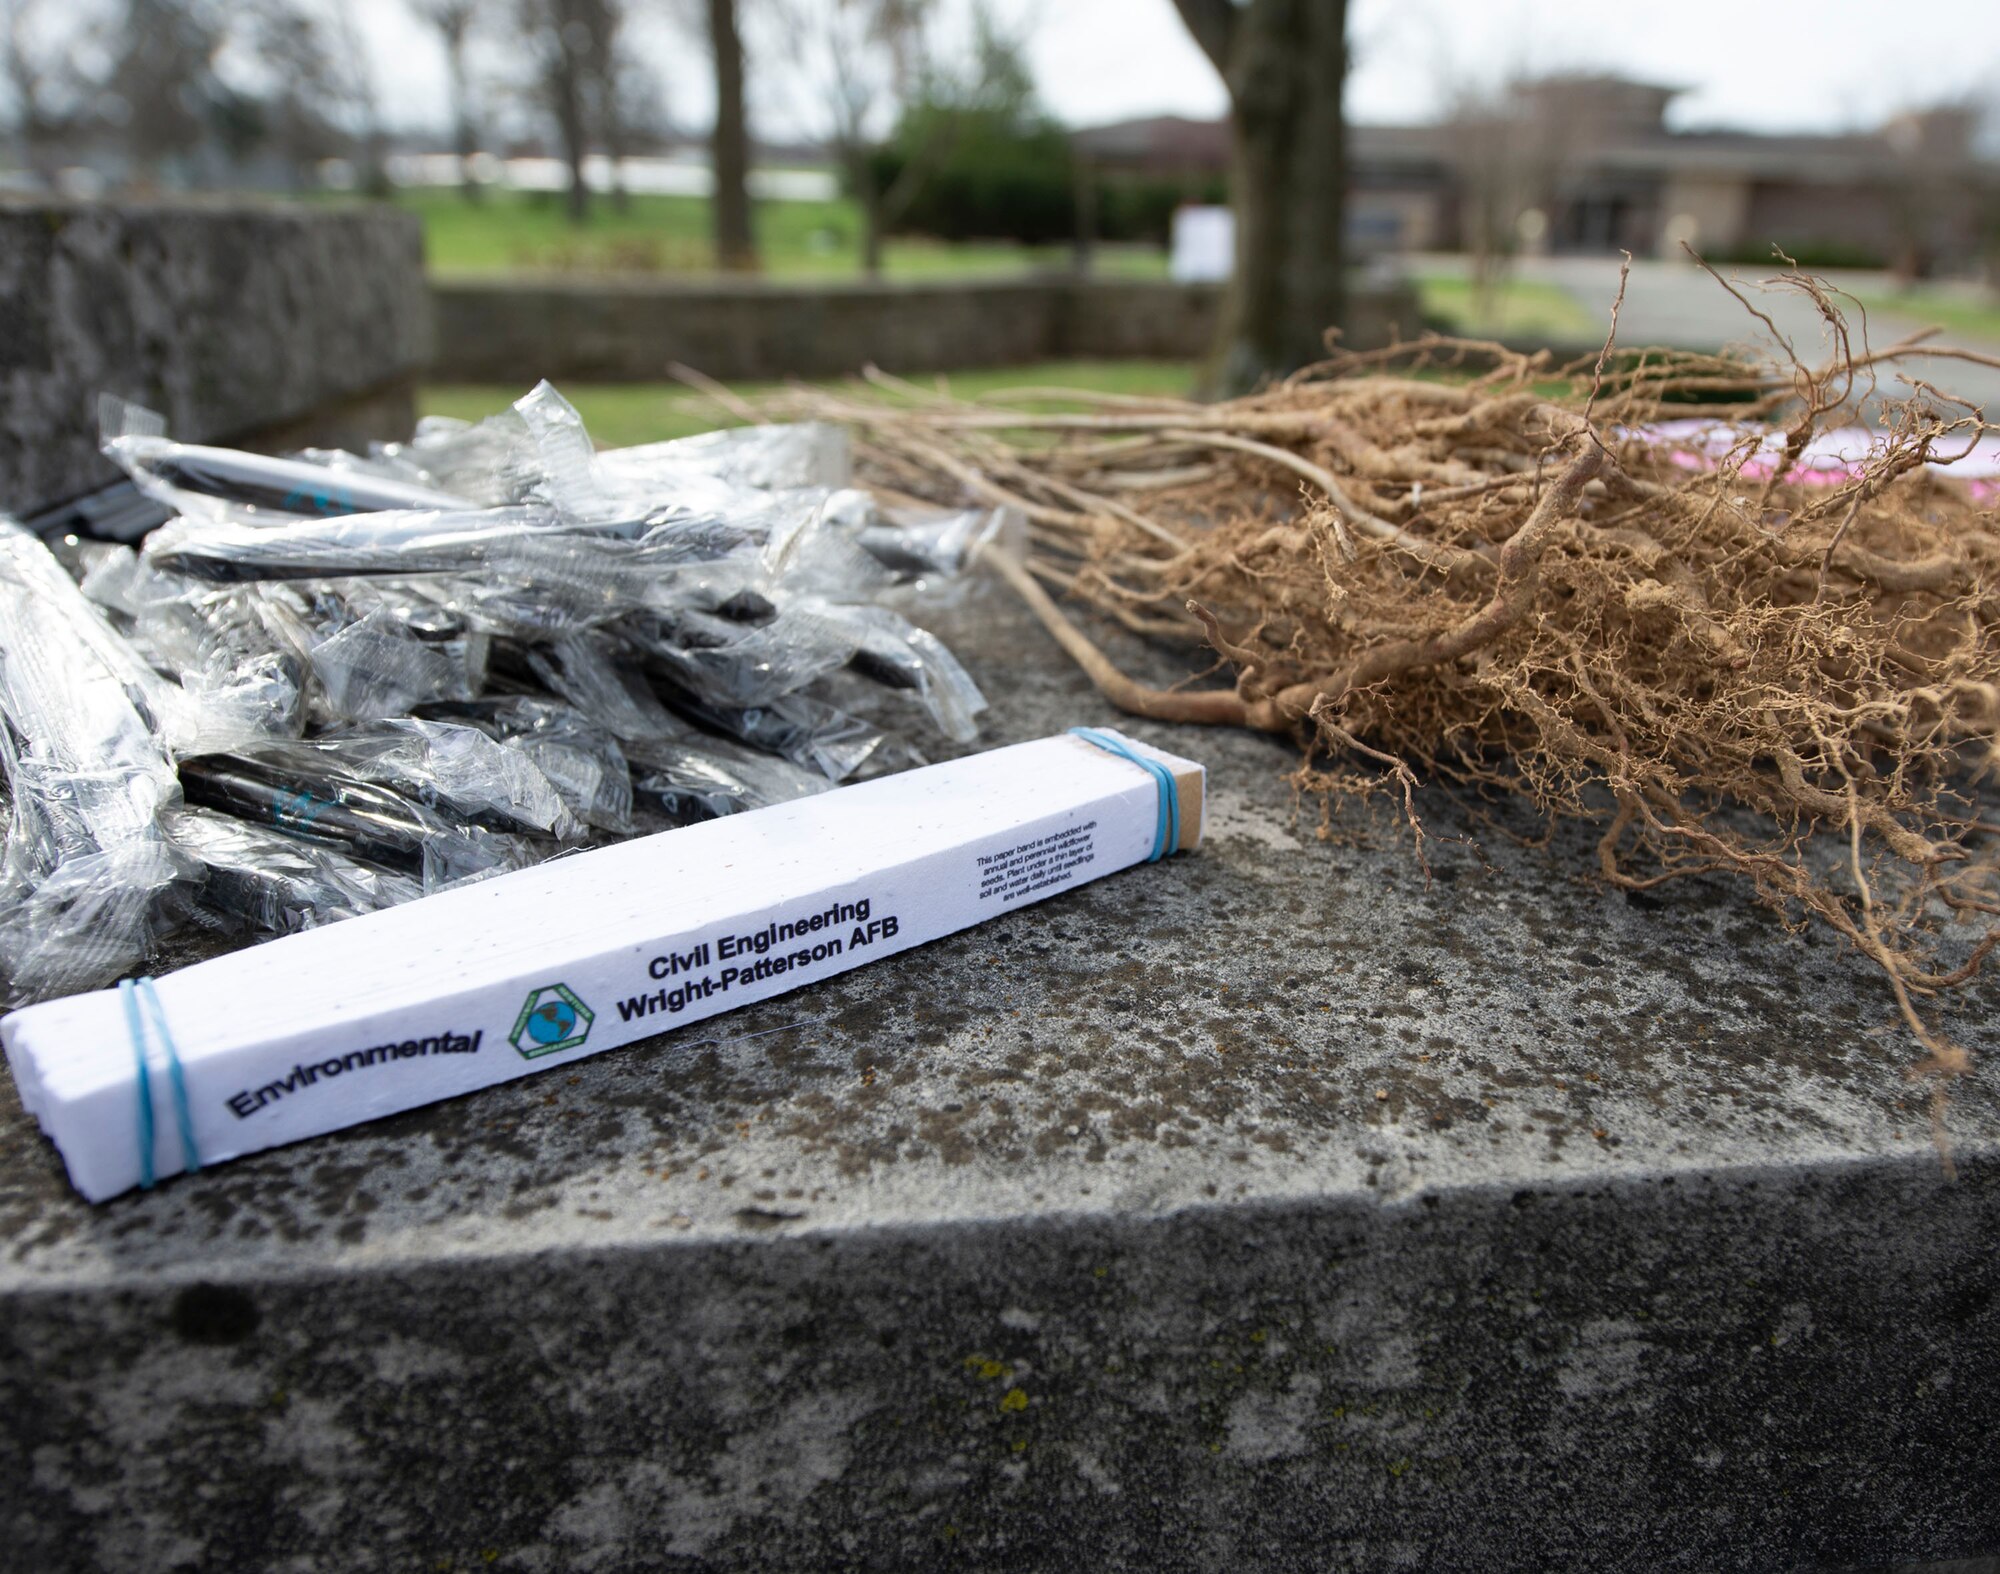 Packaged pens and redbud tree seedlings lay on the concrete surface during the 88th Civil Engineer Group Arbor Day event on the grounds near the Wright Brothers Memorial, Dayton, Ohio, April 11, 2019. The 88th CEG, gave out redbud tree seedlings to Fairborn High School students for their support efforts to protect the trees and woodlands. (U.S. Air Force photo by Michelle Gigante)